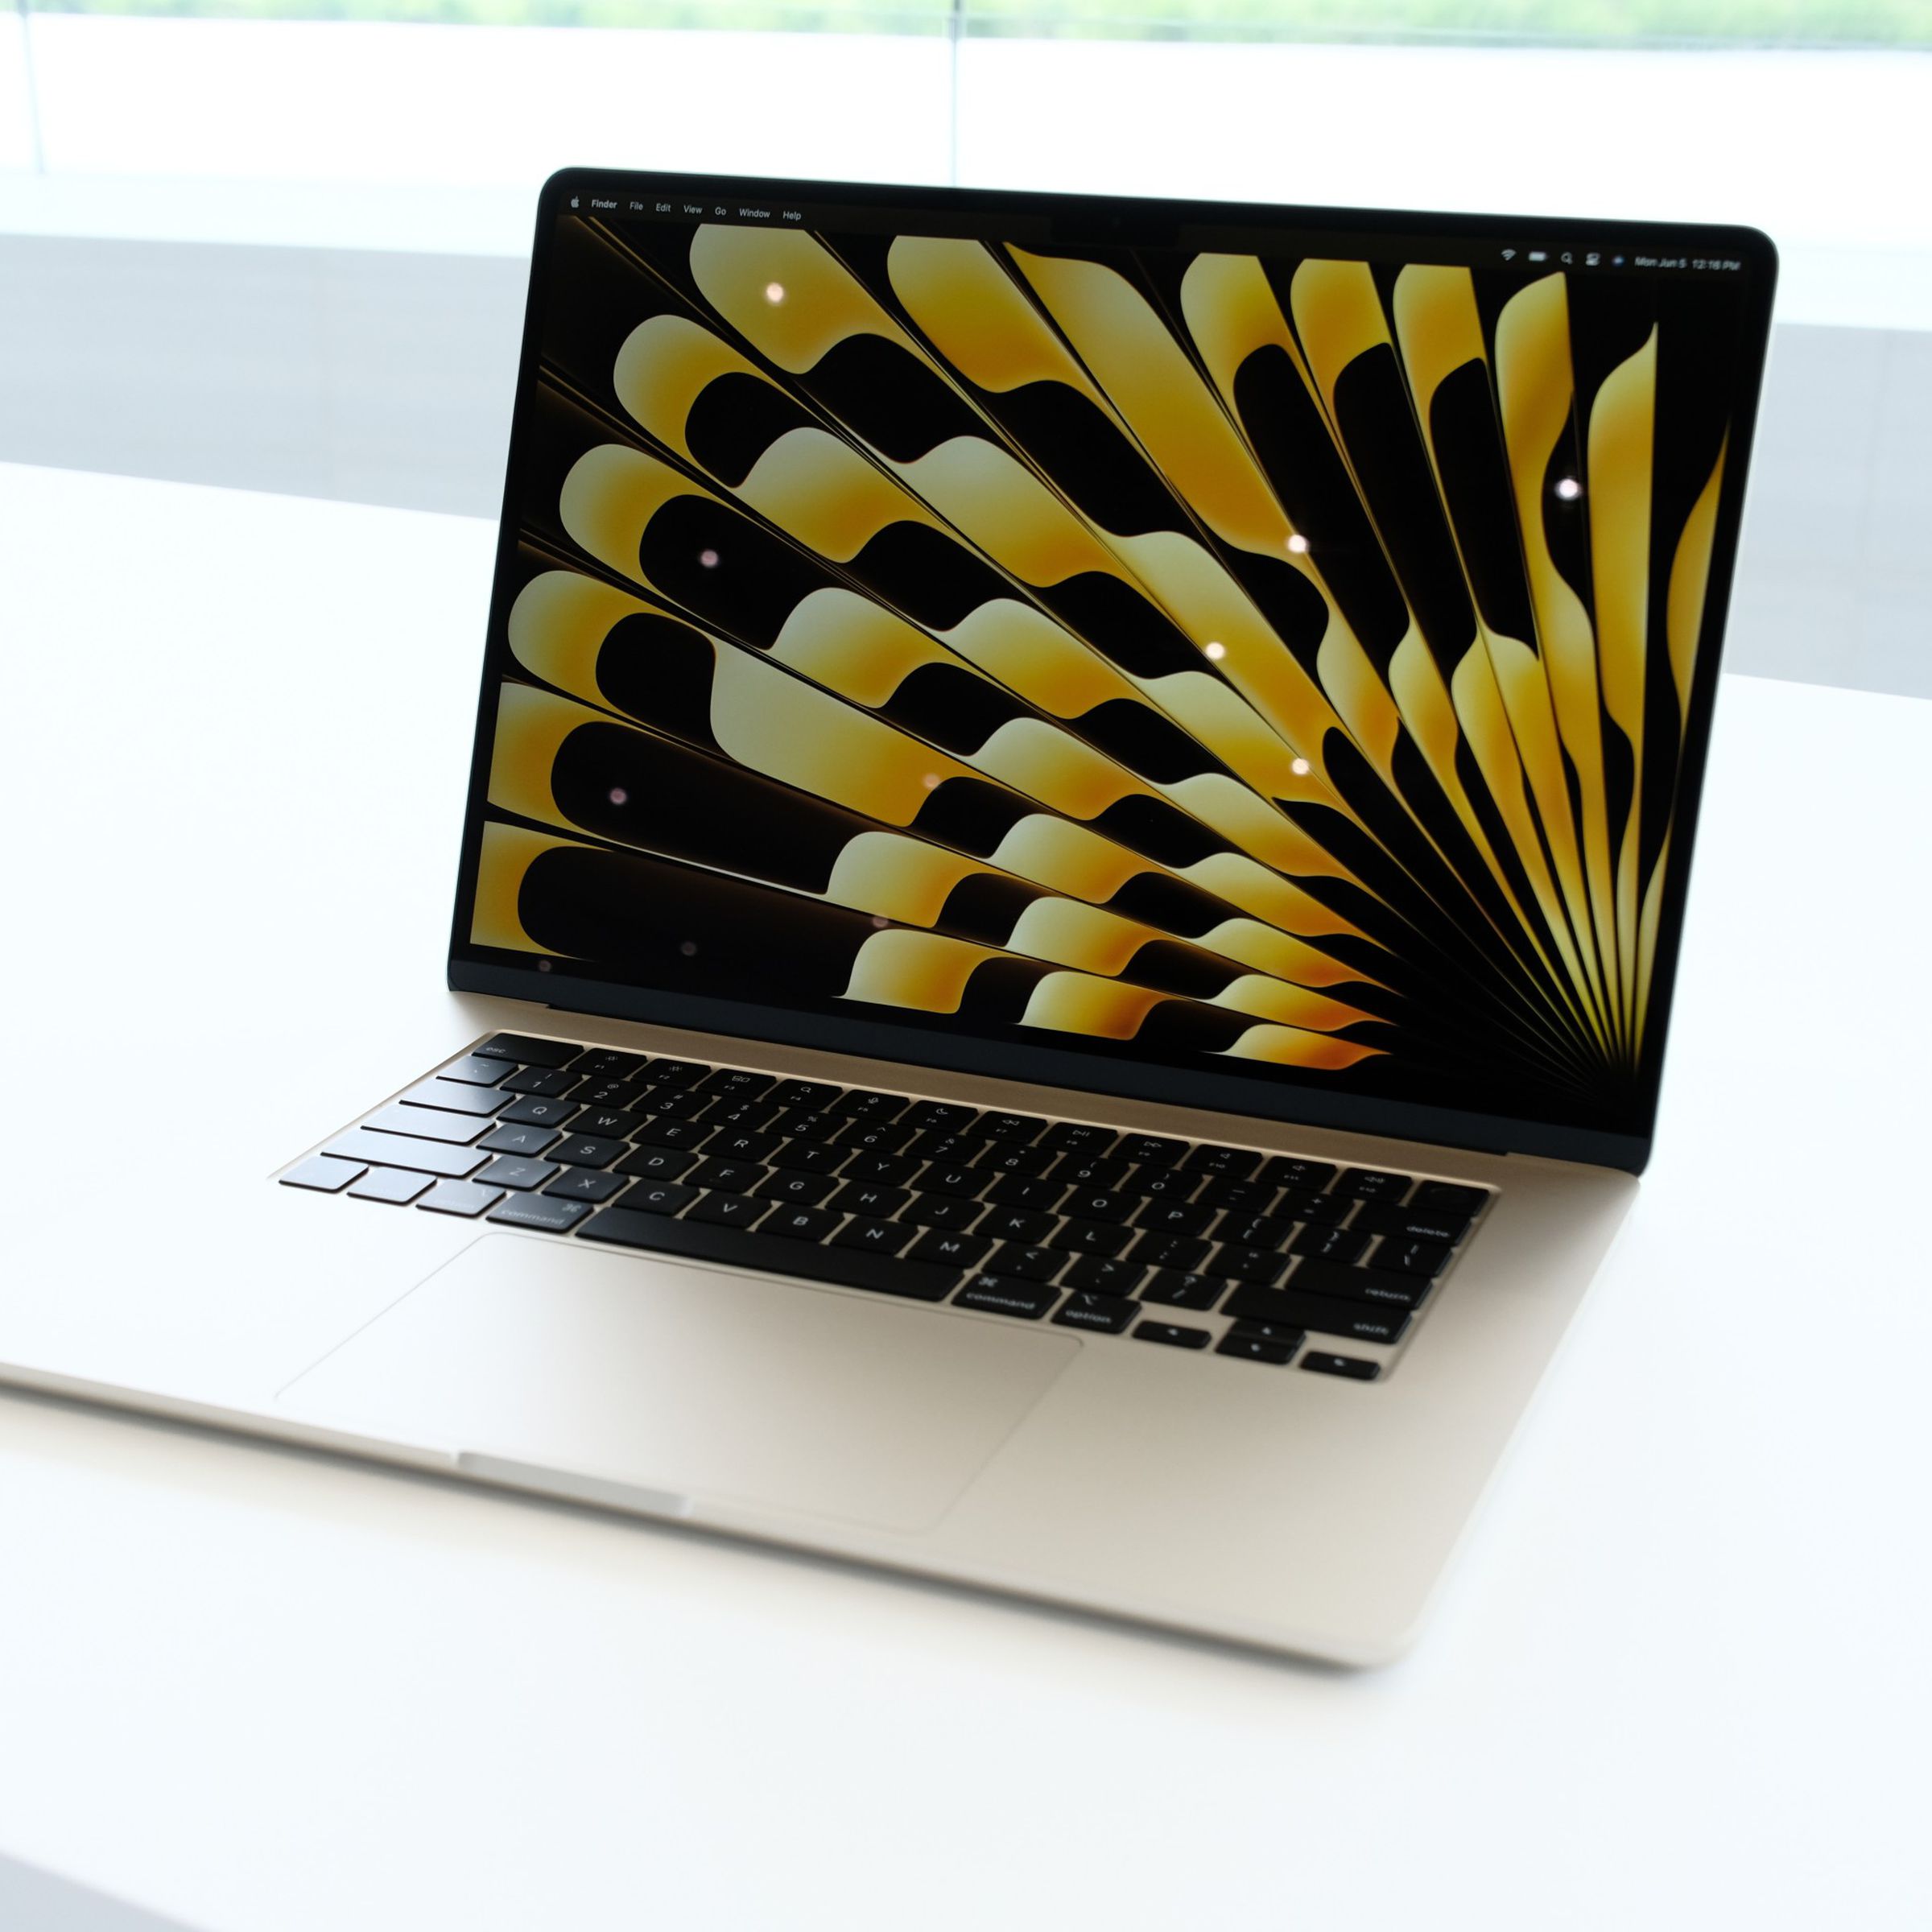 A Starlight 15-inch MacBook Air with its lid open on a white table.